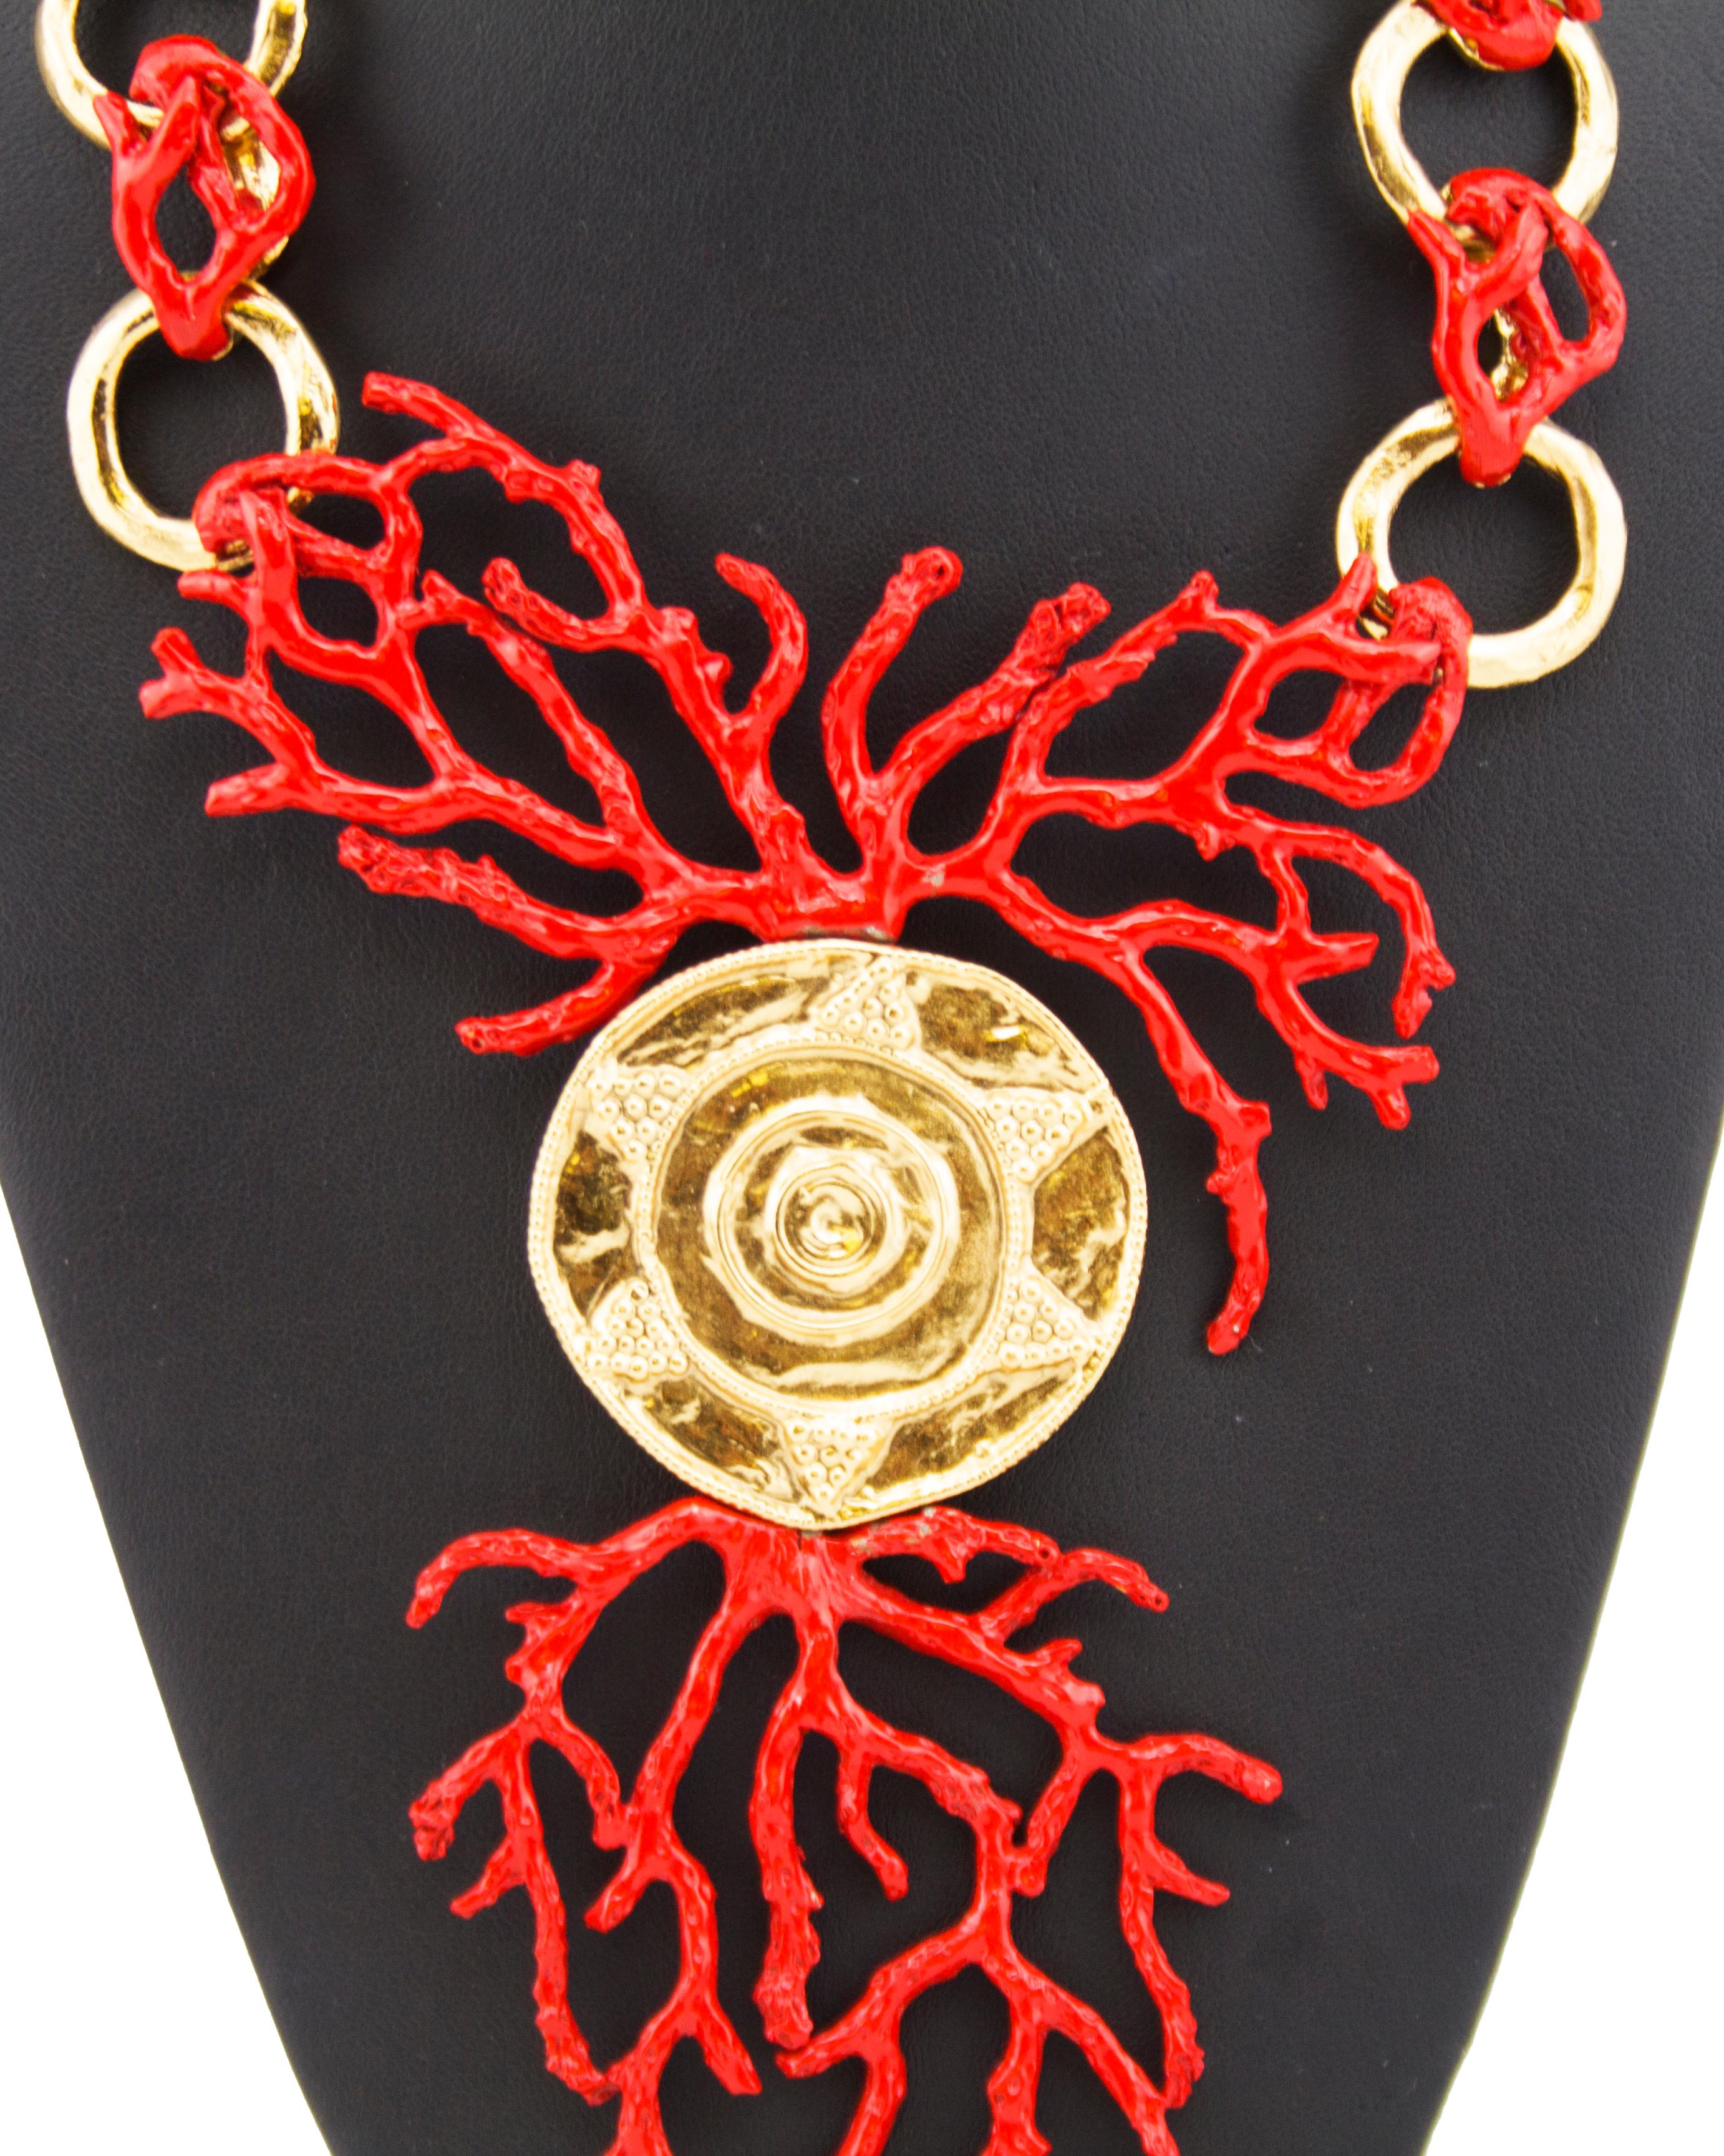 Stunning 1980s Yves Saint Laurent Rive Gauche statement necklace. Gold tone metal with a bright orange-red faux coral enamel details. Large round gold pendant with circular sun details. Gold chain link rings alternate between the smaller coral